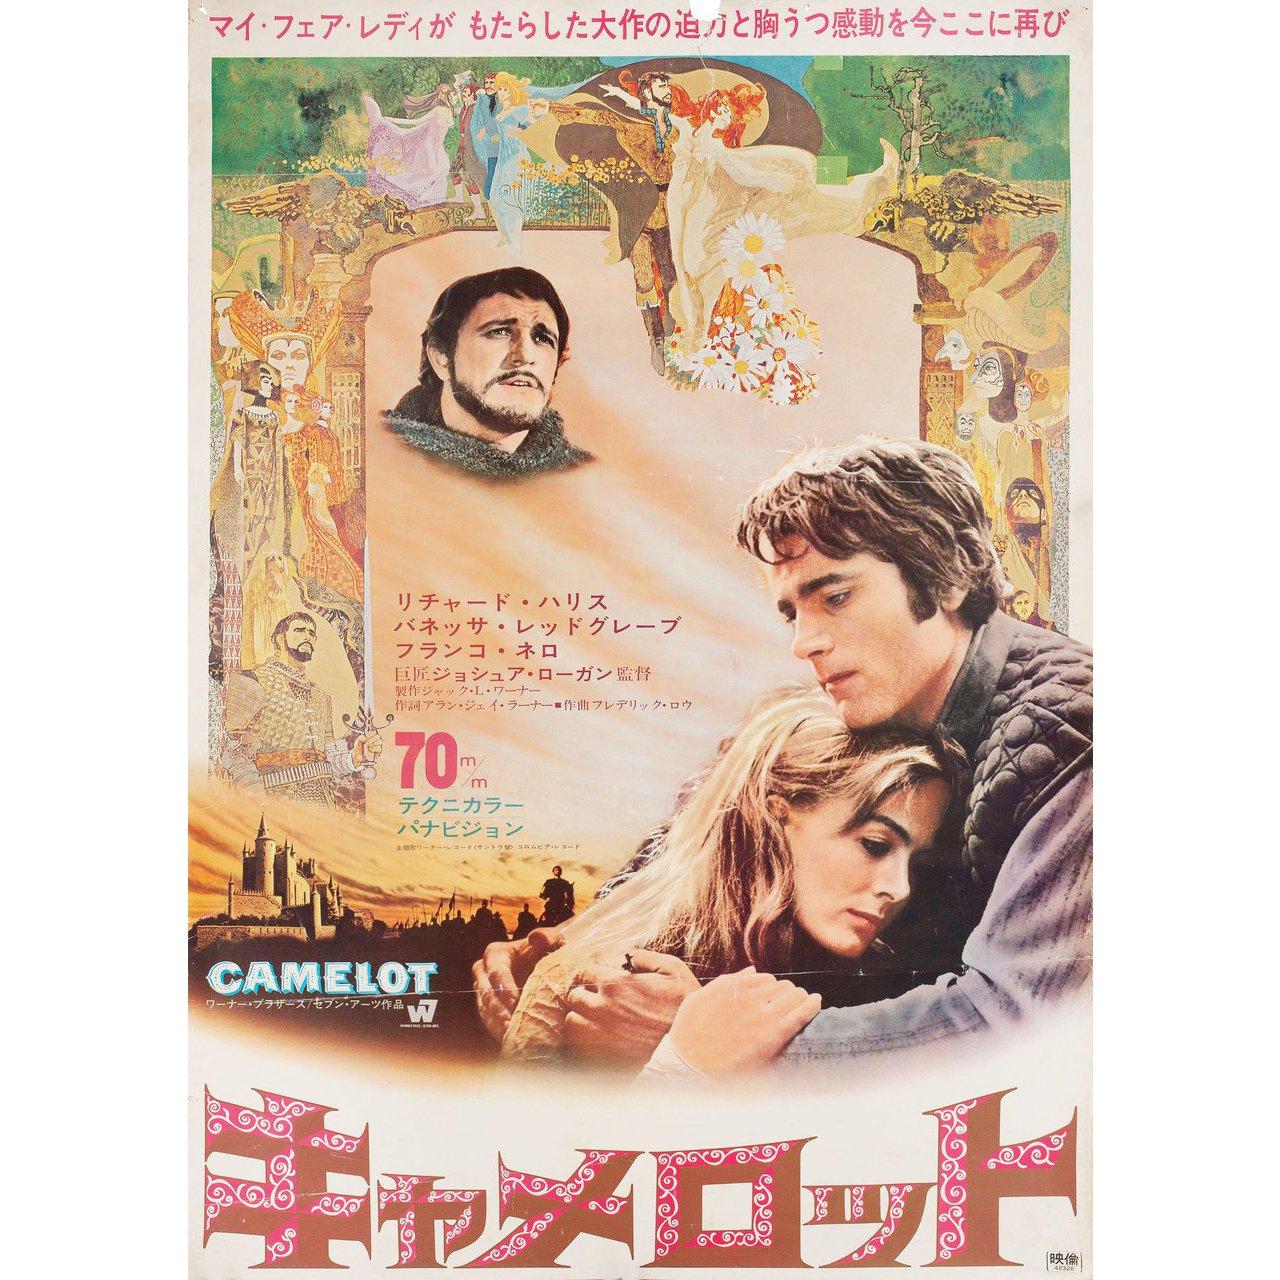 Original 1967 Japanese B2 poster for the film Camelot directed by Joshua Logan with Richard Harris / Vanessa Redgrave / Franco Nero / David Hemmings. Very good-fine condition, rolled with 7 inch repaired tear at top. Please note: the size is stated